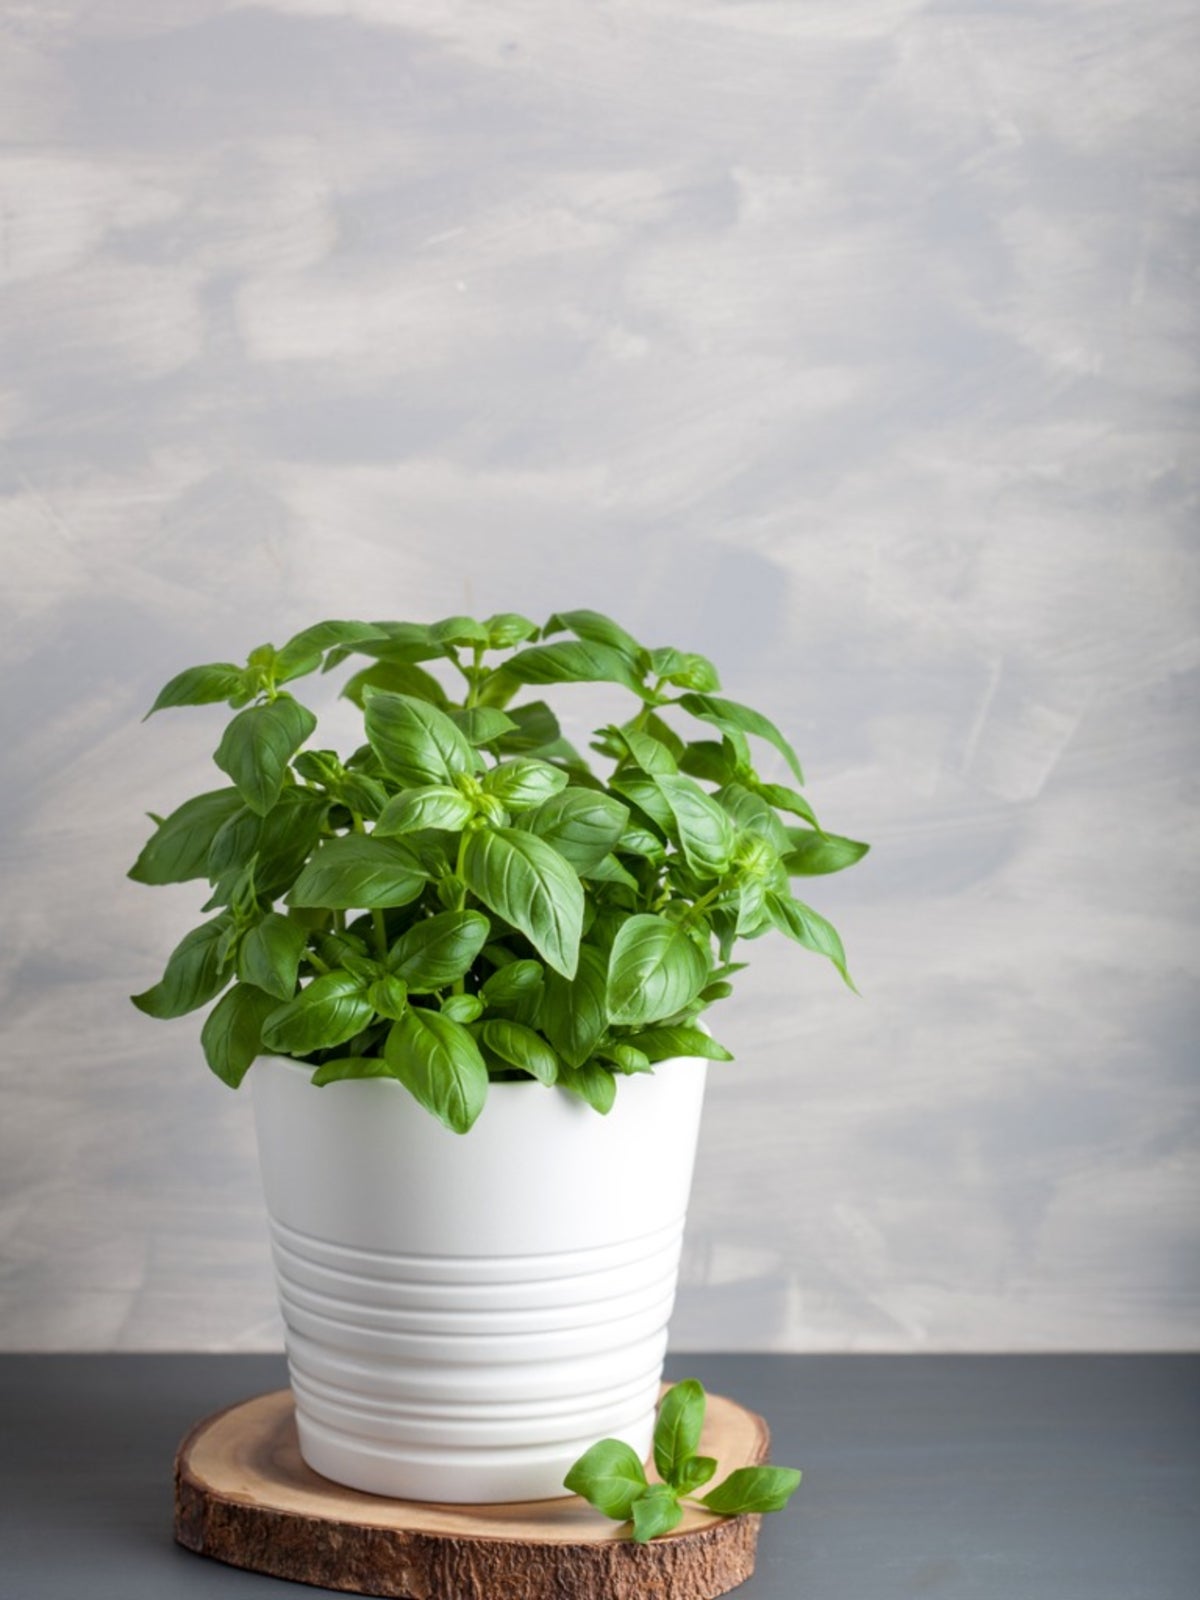 How to best care for potted basil plants in door